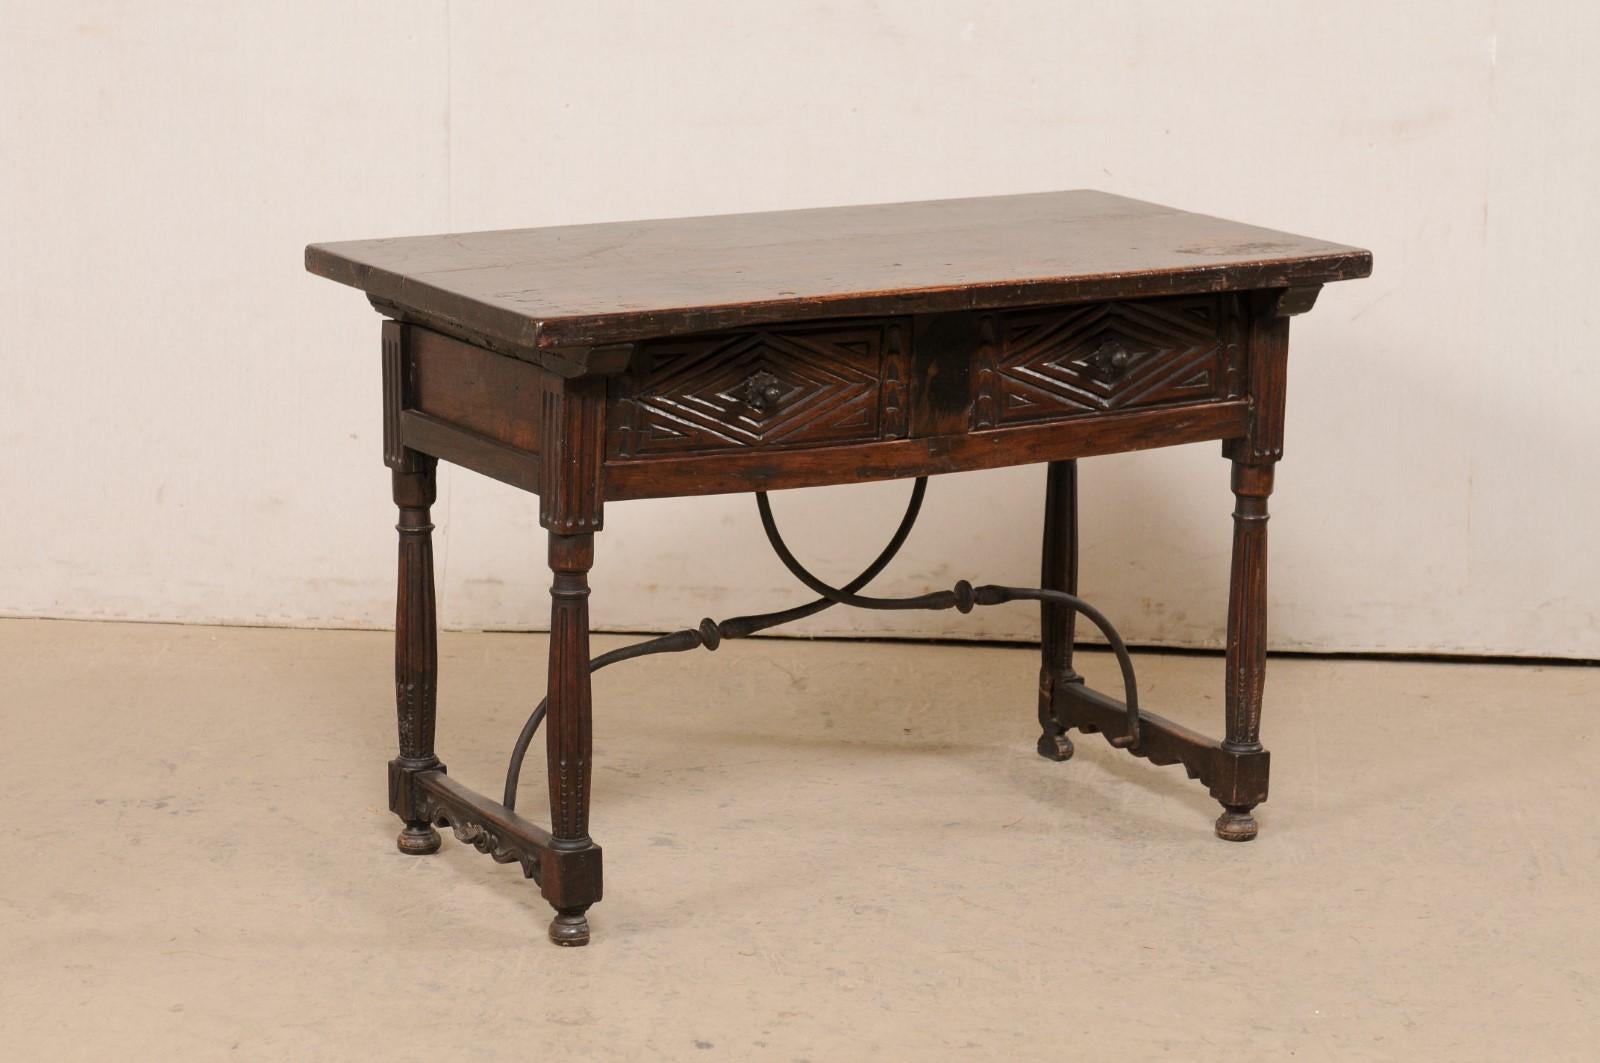 An Italian two-drawer table with iron stretcher from the late 18th century. This antique walnut table from Italy has a rectangular-shaped top, which overhangs the apron below which houses a pair of drawers at one long side, which are carved in a